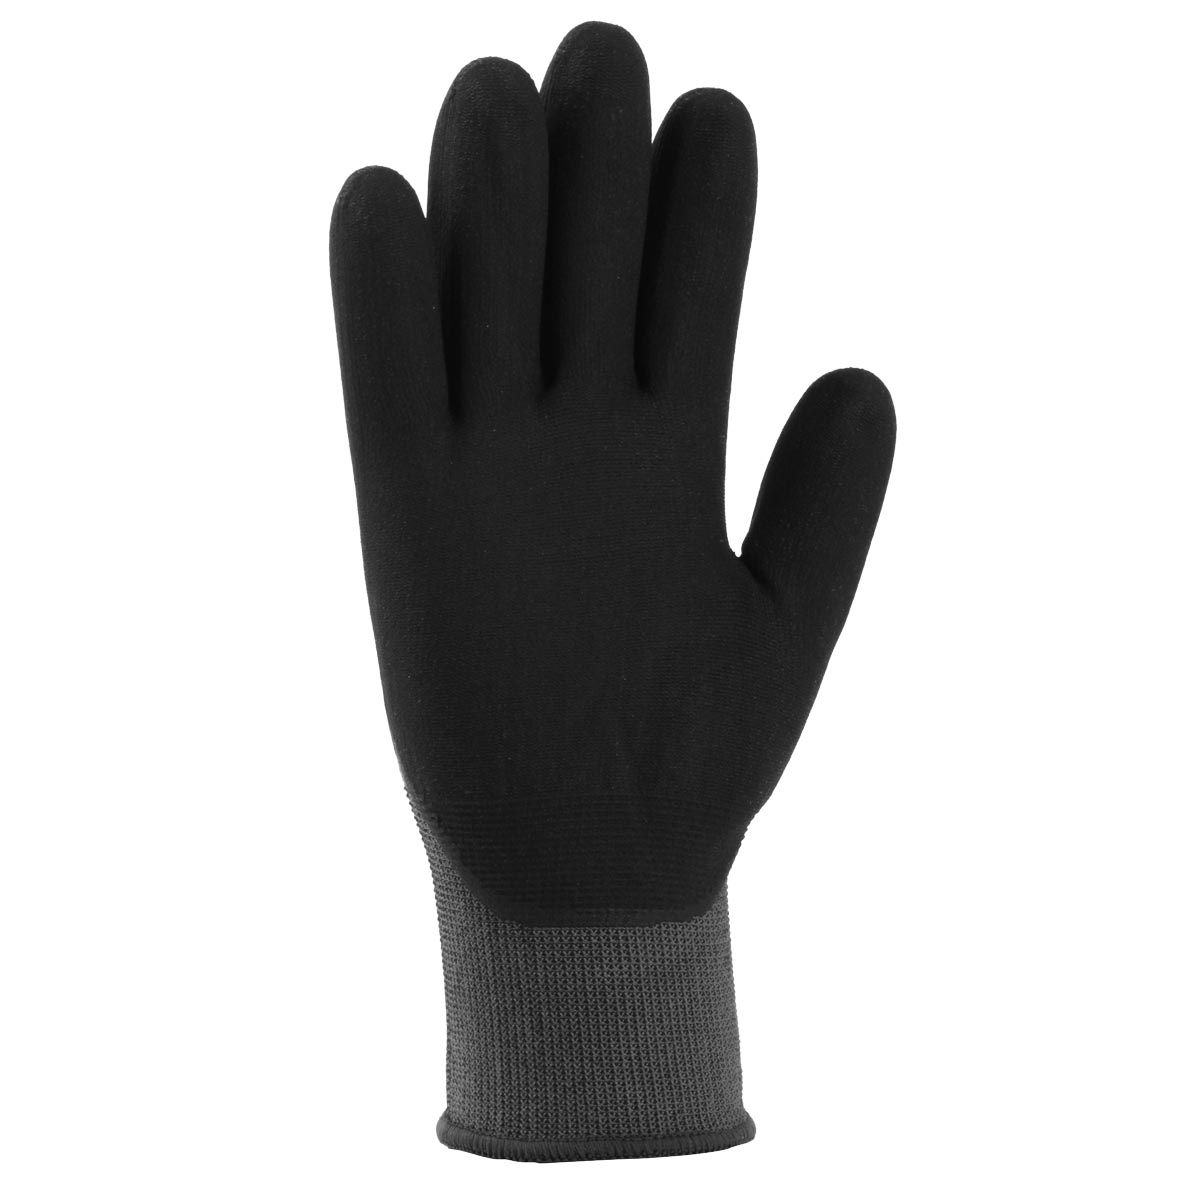 Carhartt Men's Thermal Lined Full Coverage Nitrile Glove